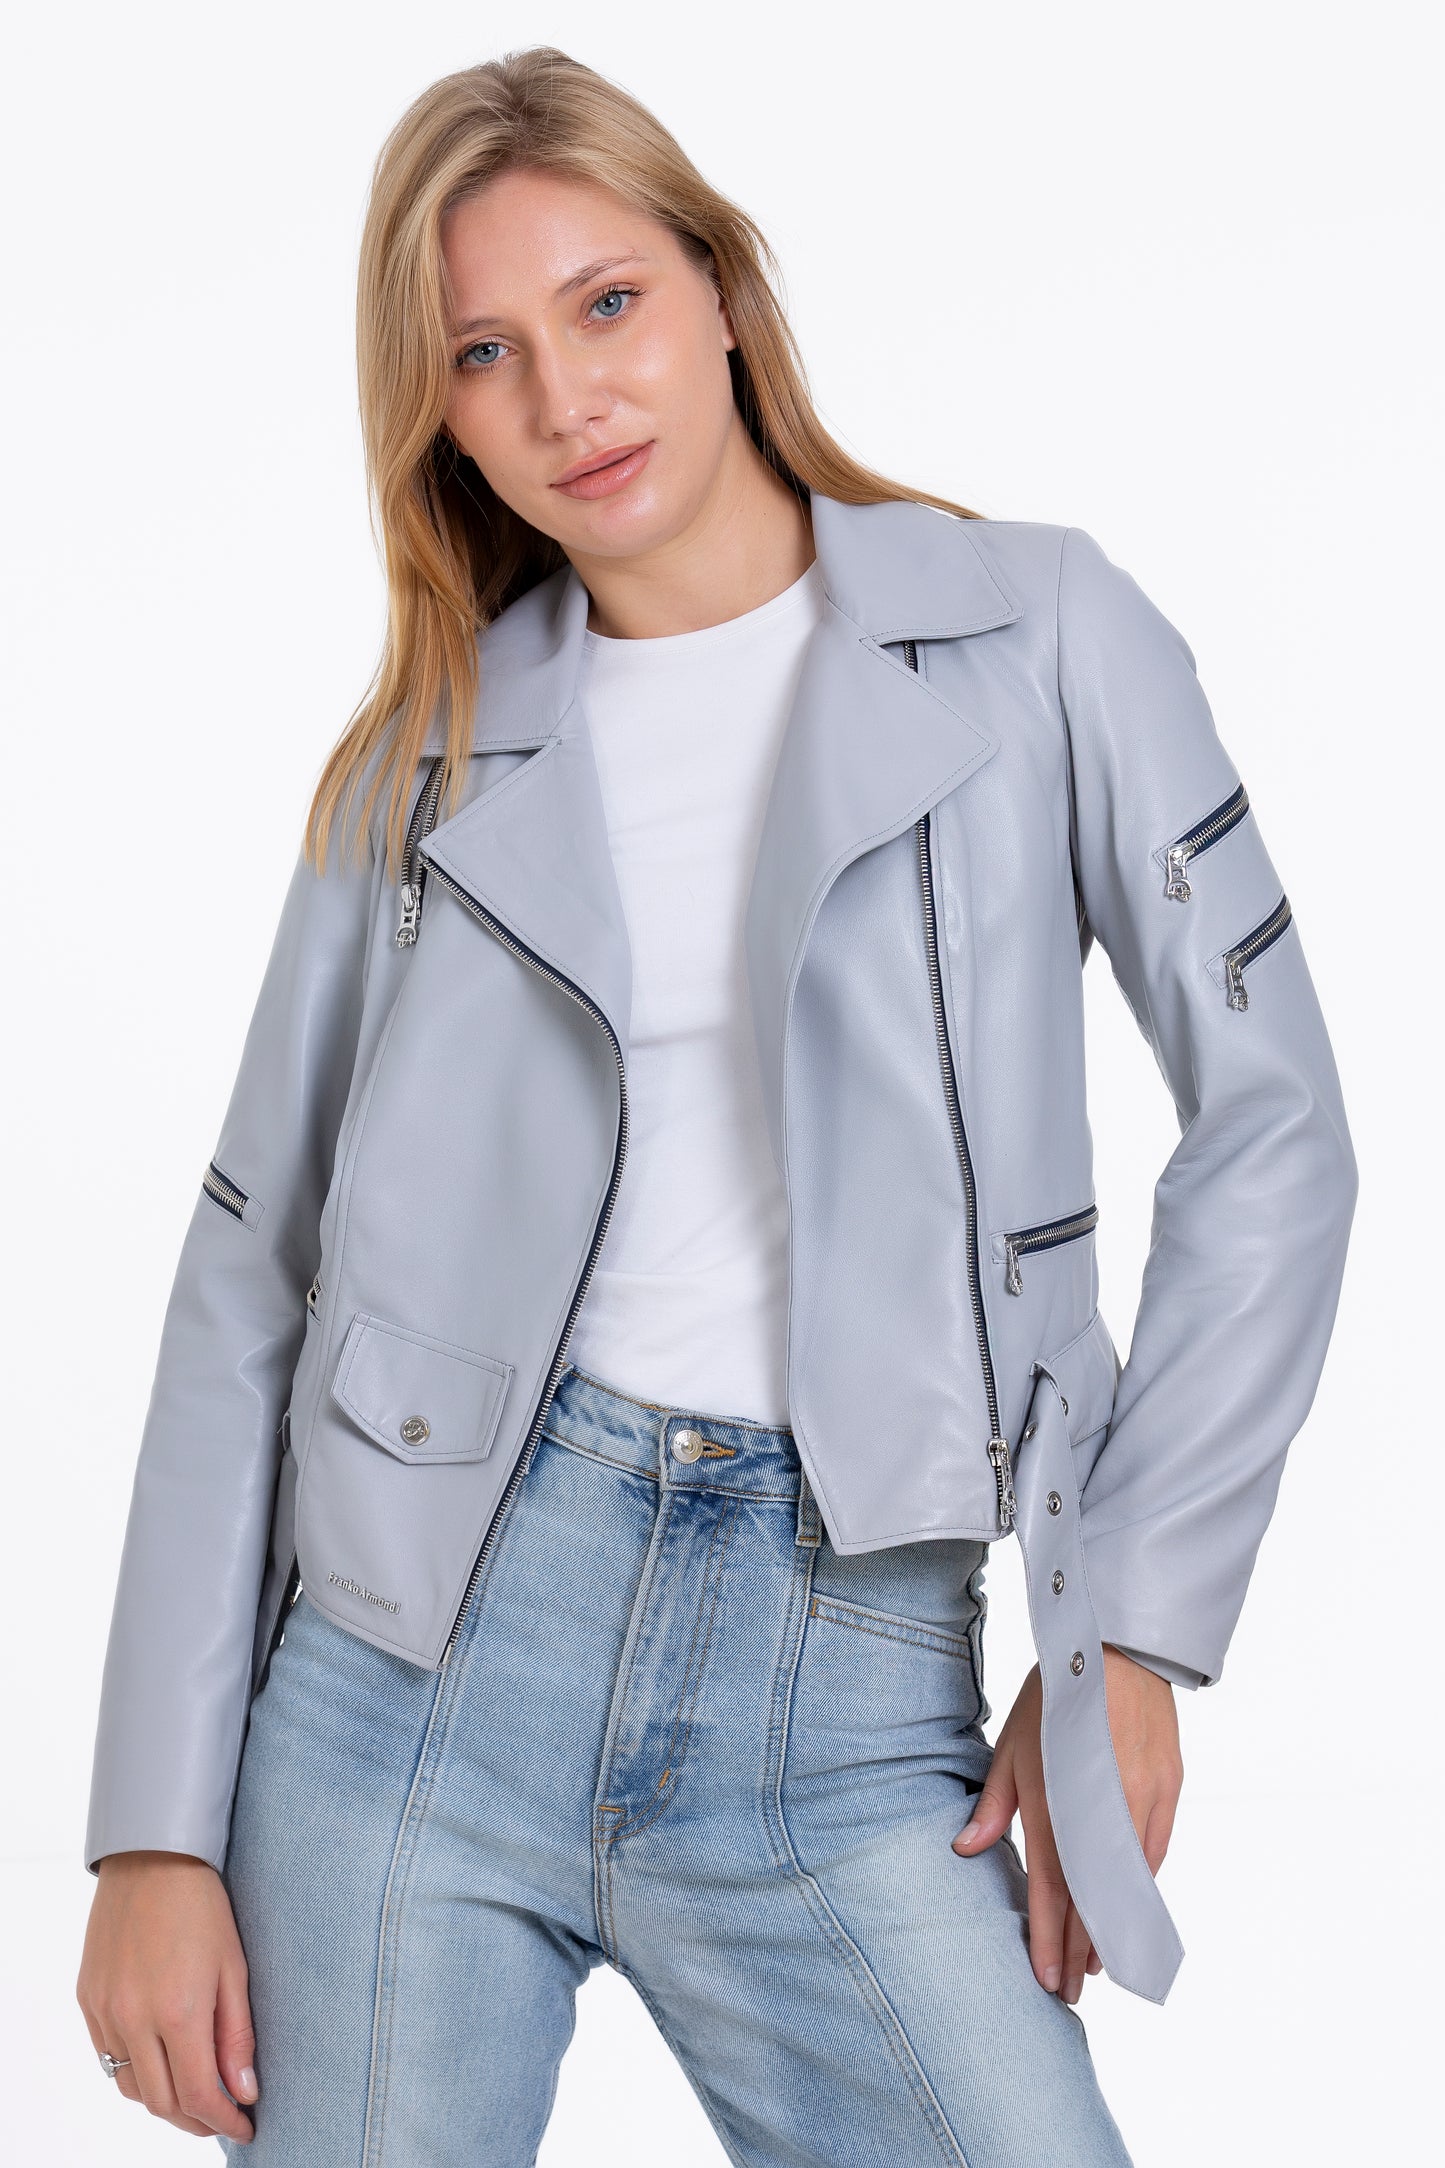 The Rodos Leather Gray Jacket